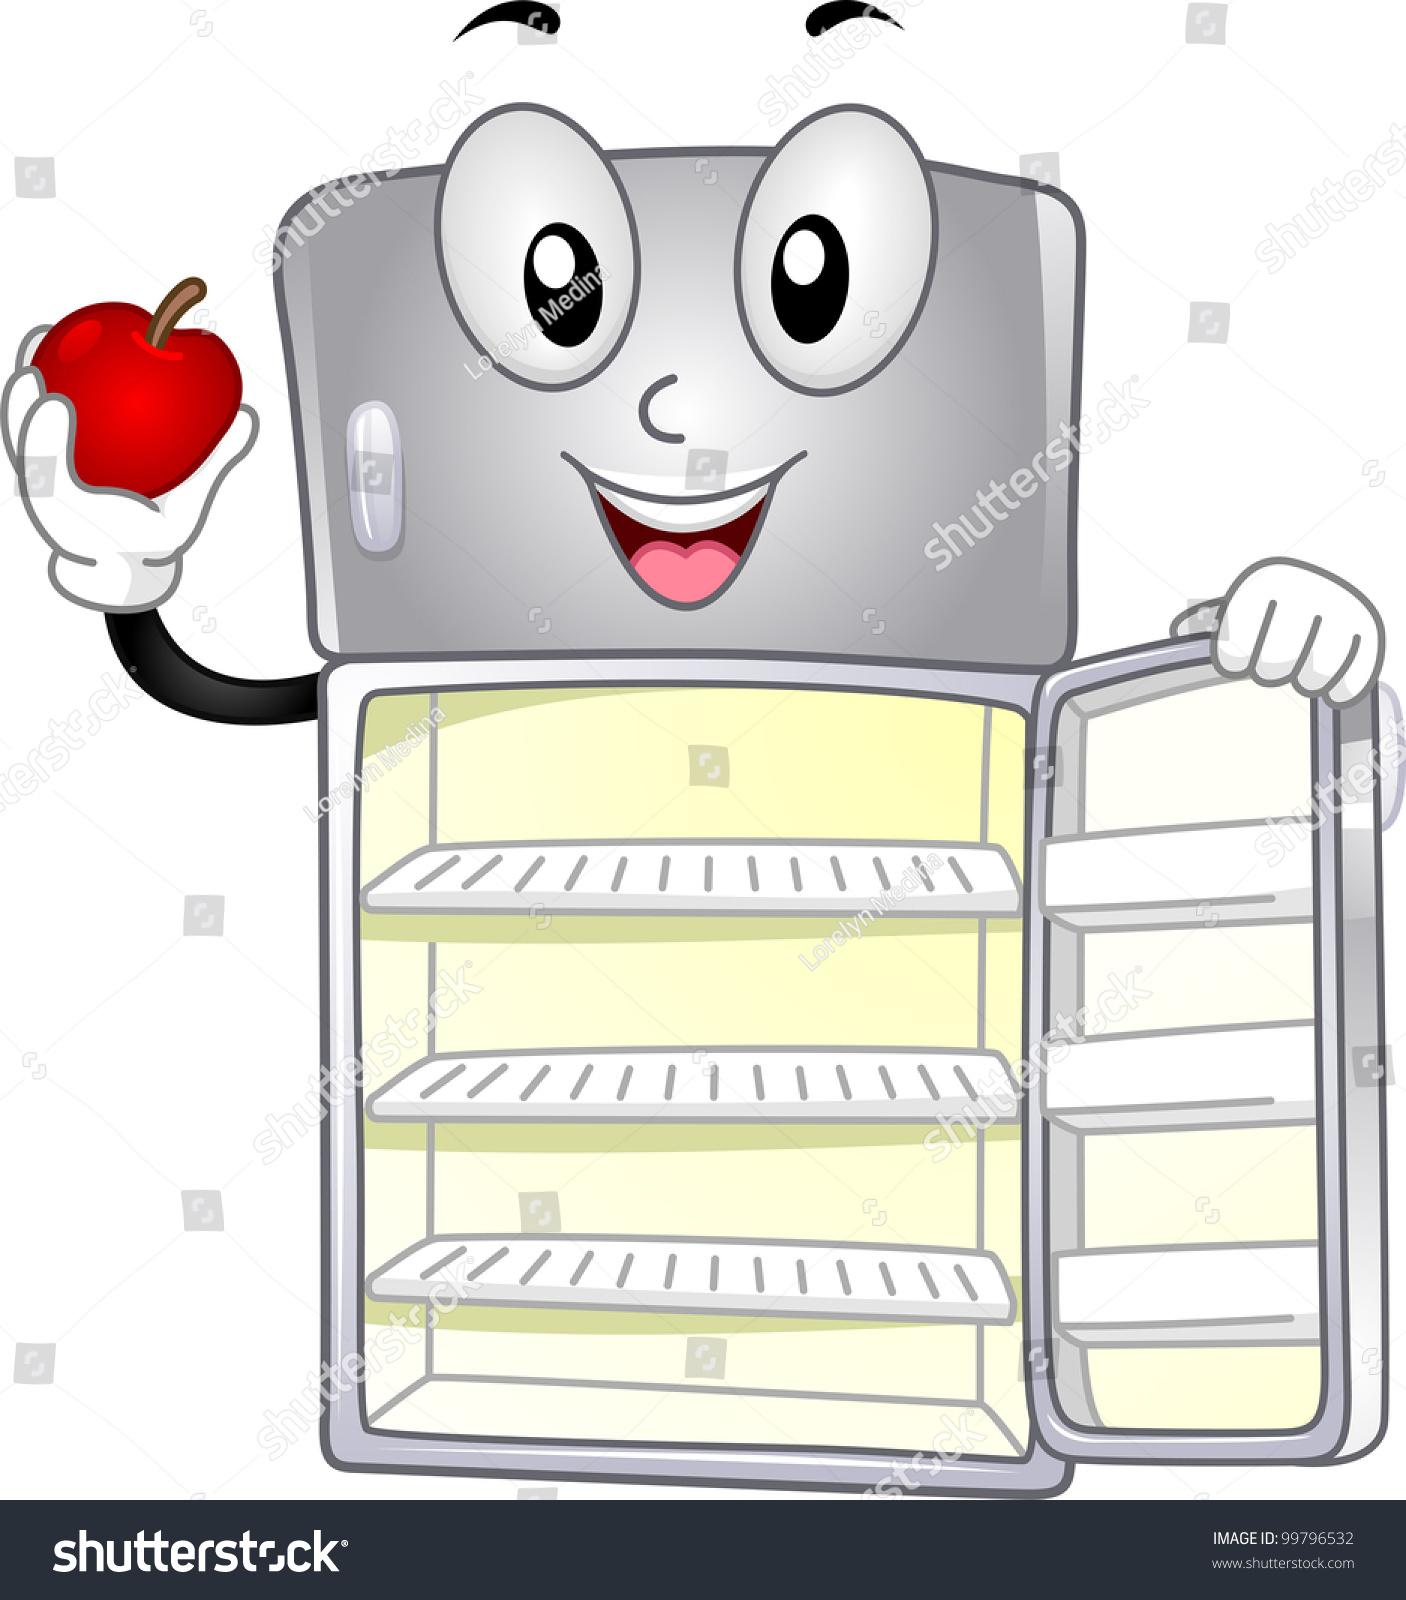 clipart fridge cleaning - photo #42